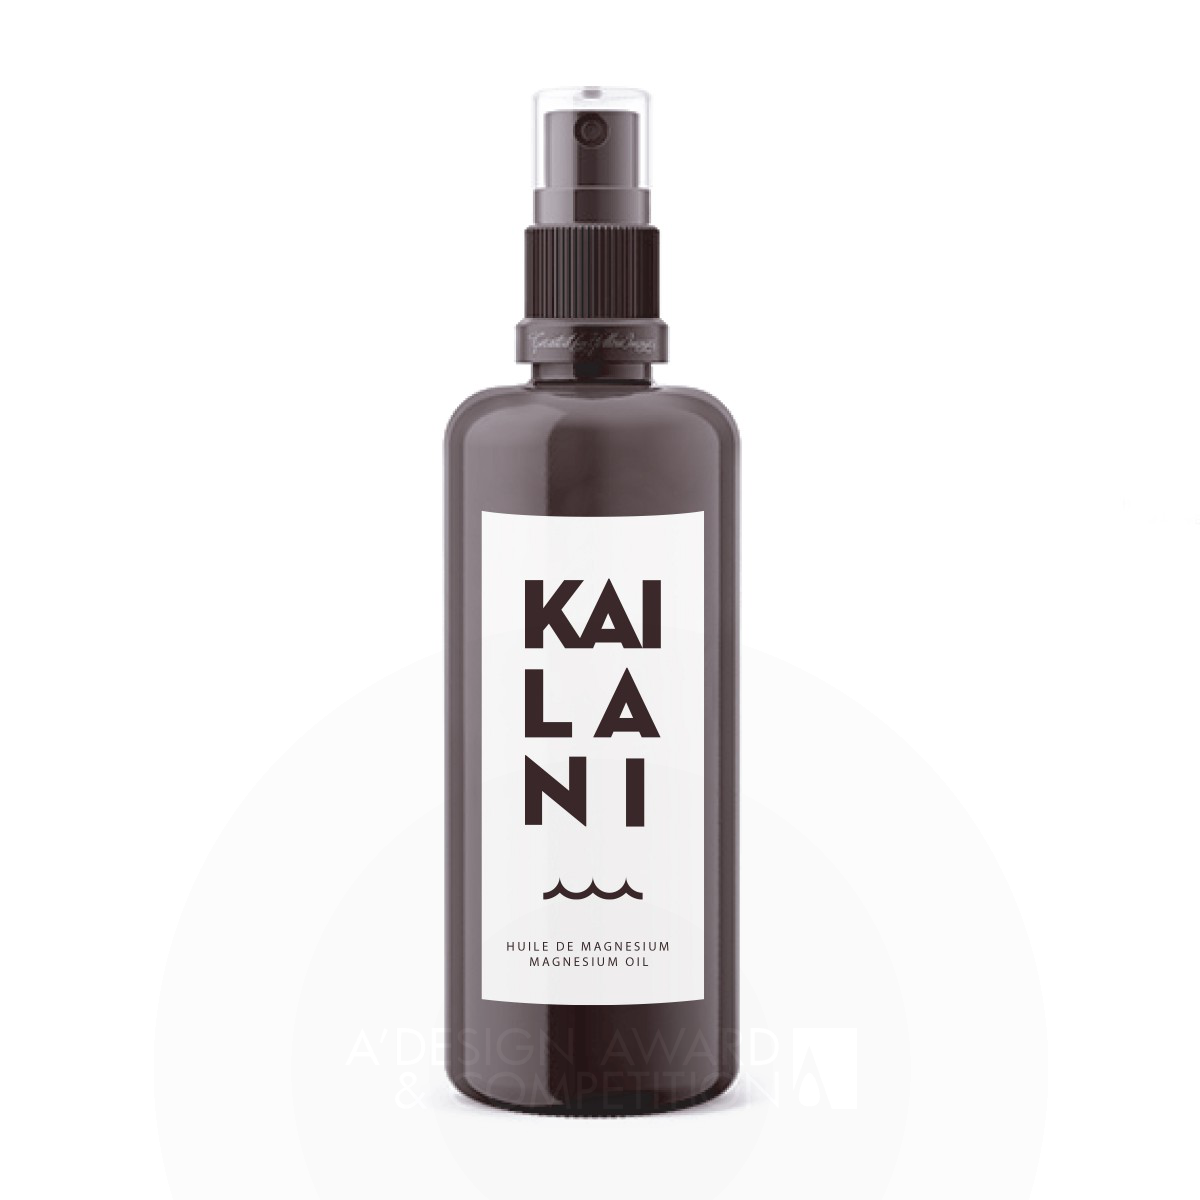 Kailani Magnesium Packaging by Delphine Goyon  amp  Catherine Alamy